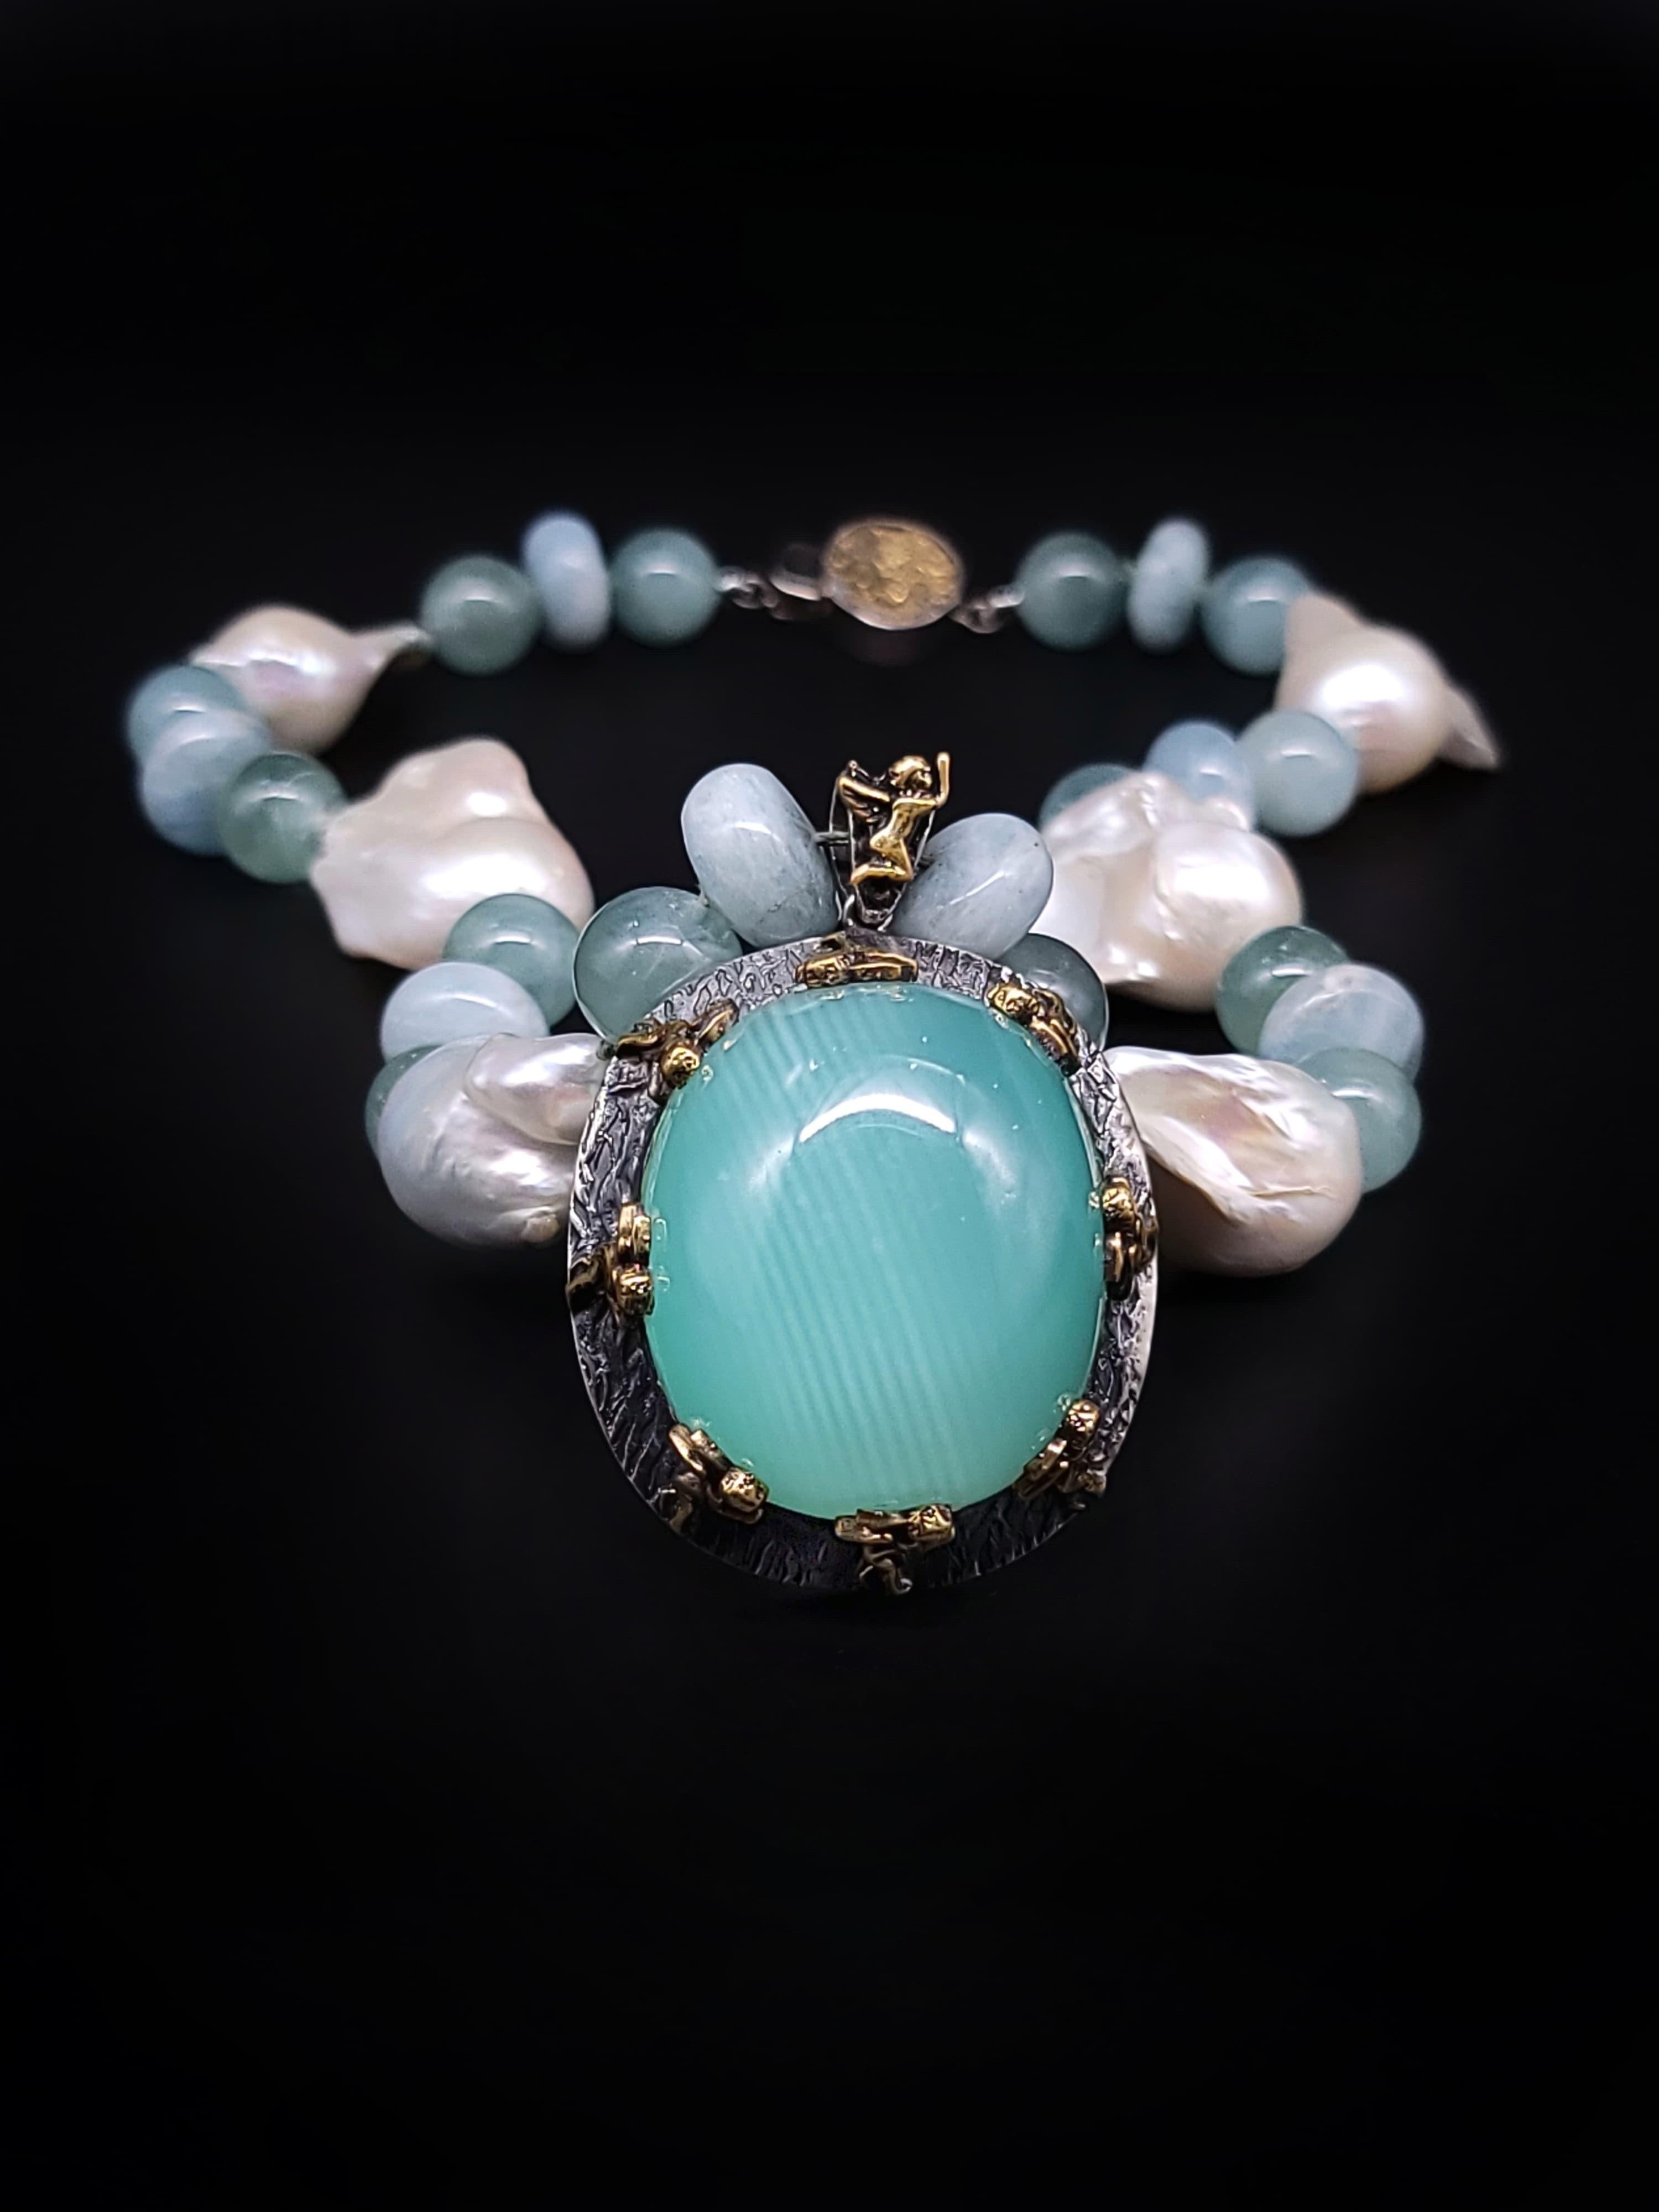 A.Jeschel Massive Aquamarine Pendant suspended from Baroque Pearl Necklace For Sale 9